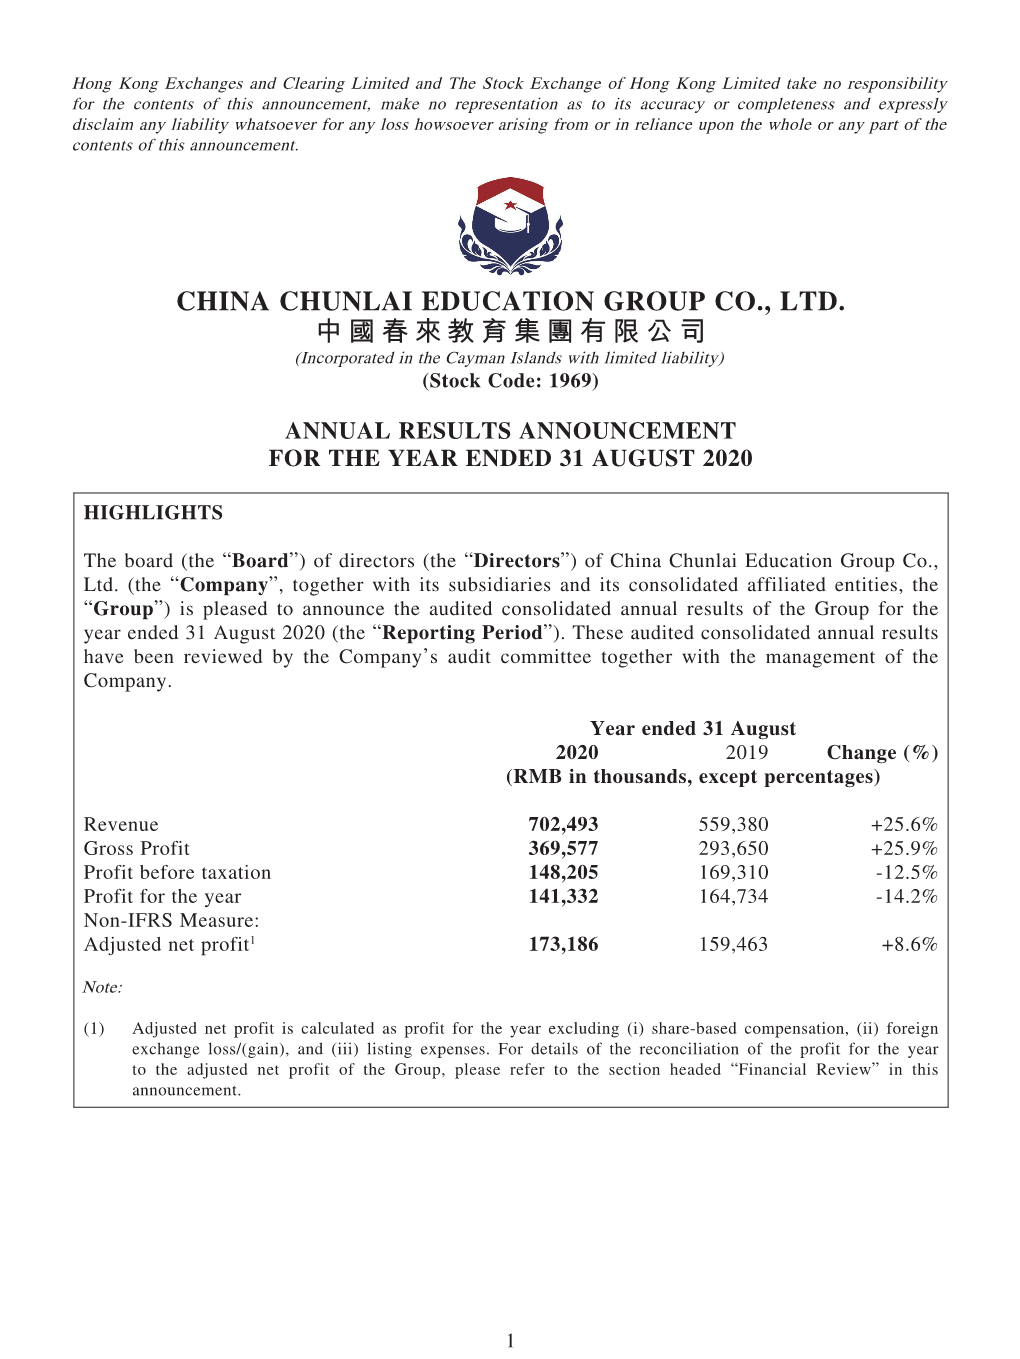 CHINA CHUNLAI EDUCATION GROUP CO., LTD. 中國春來教育集團有限公司 (Incorporated in the Cayman Islands with Limited Liability) (Stock Code: 1969)